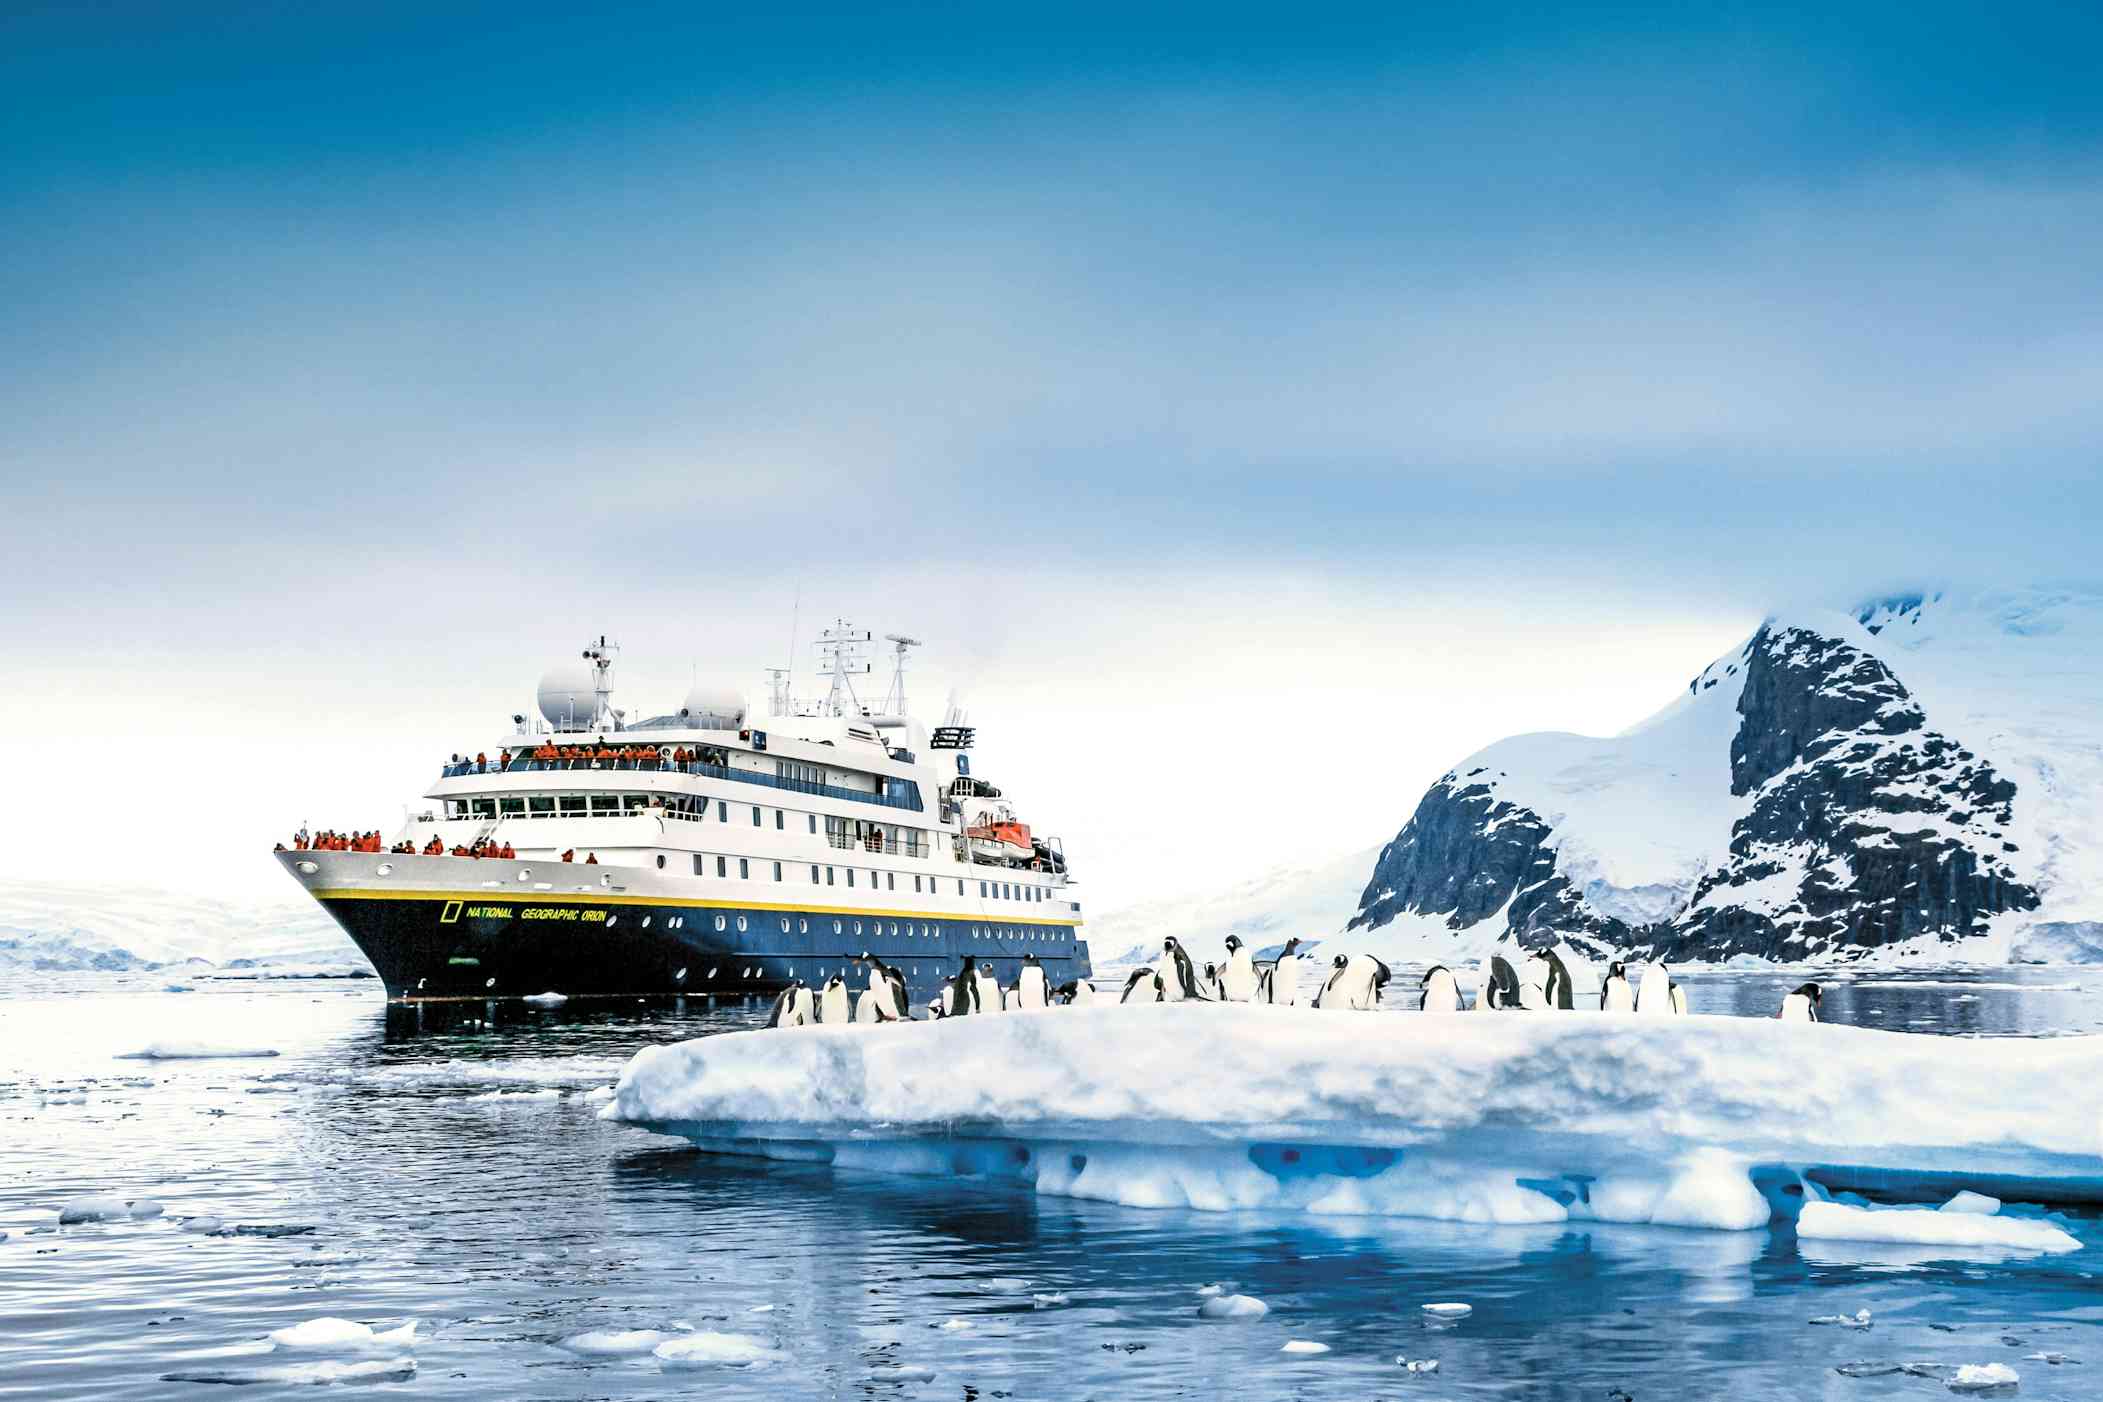 https://img.cruisecritic.net/cms-sb/f/1005231/09ccdf147e/national-geographic-orion_lindblad-expeditions_expedition-cruises_antarctica_article_6462.jpg?auto=compress%2Cformat&fp-z=1&h=533&w=800&ar=3%3A2&dpr=2.625&q=15&ixlib=react-9.0.2